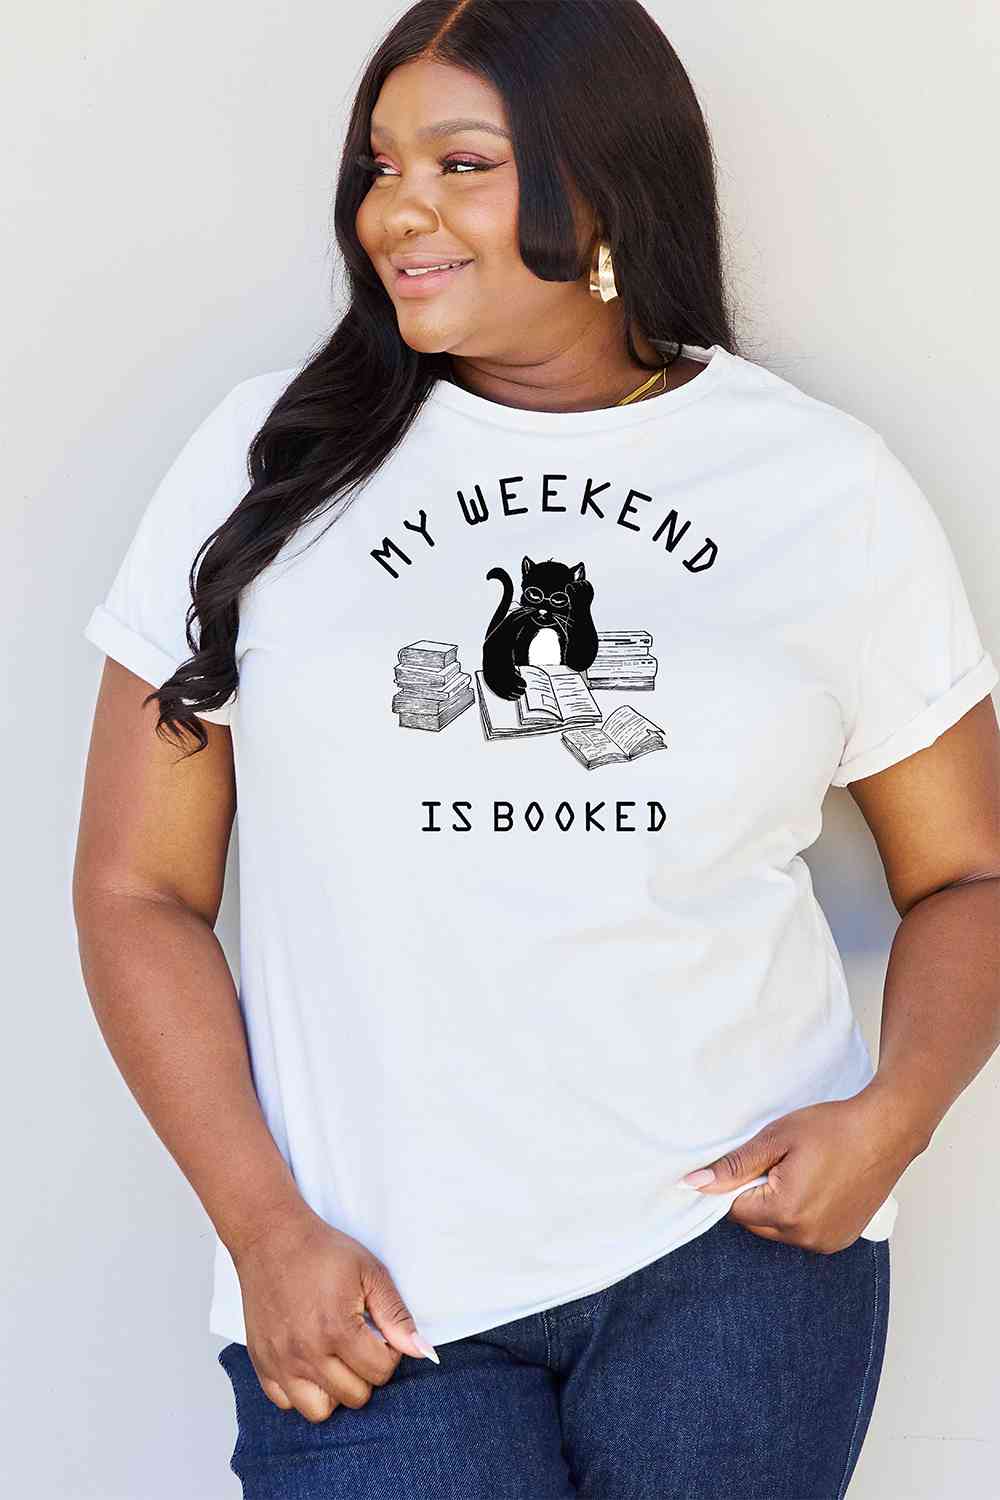 MY WEEKEND IS BOOKED TEE – Purr-fectly Cozy and Cat-tastically Cute!